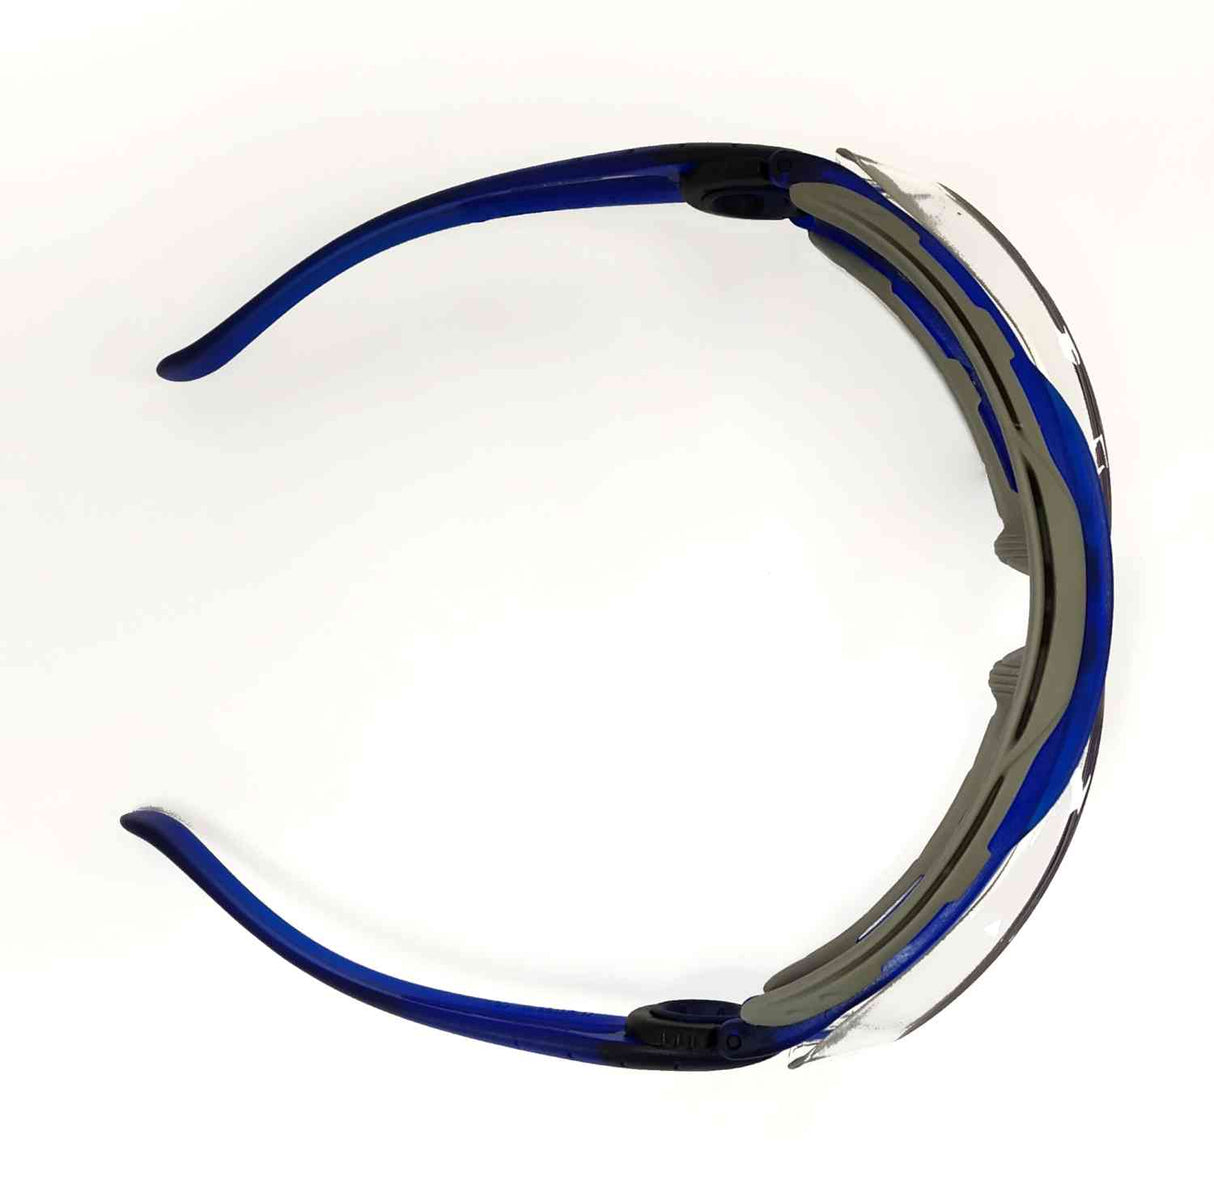 Honeywell by North VX-7 Spectacles/Goggles Polycarbonate Clear Lens